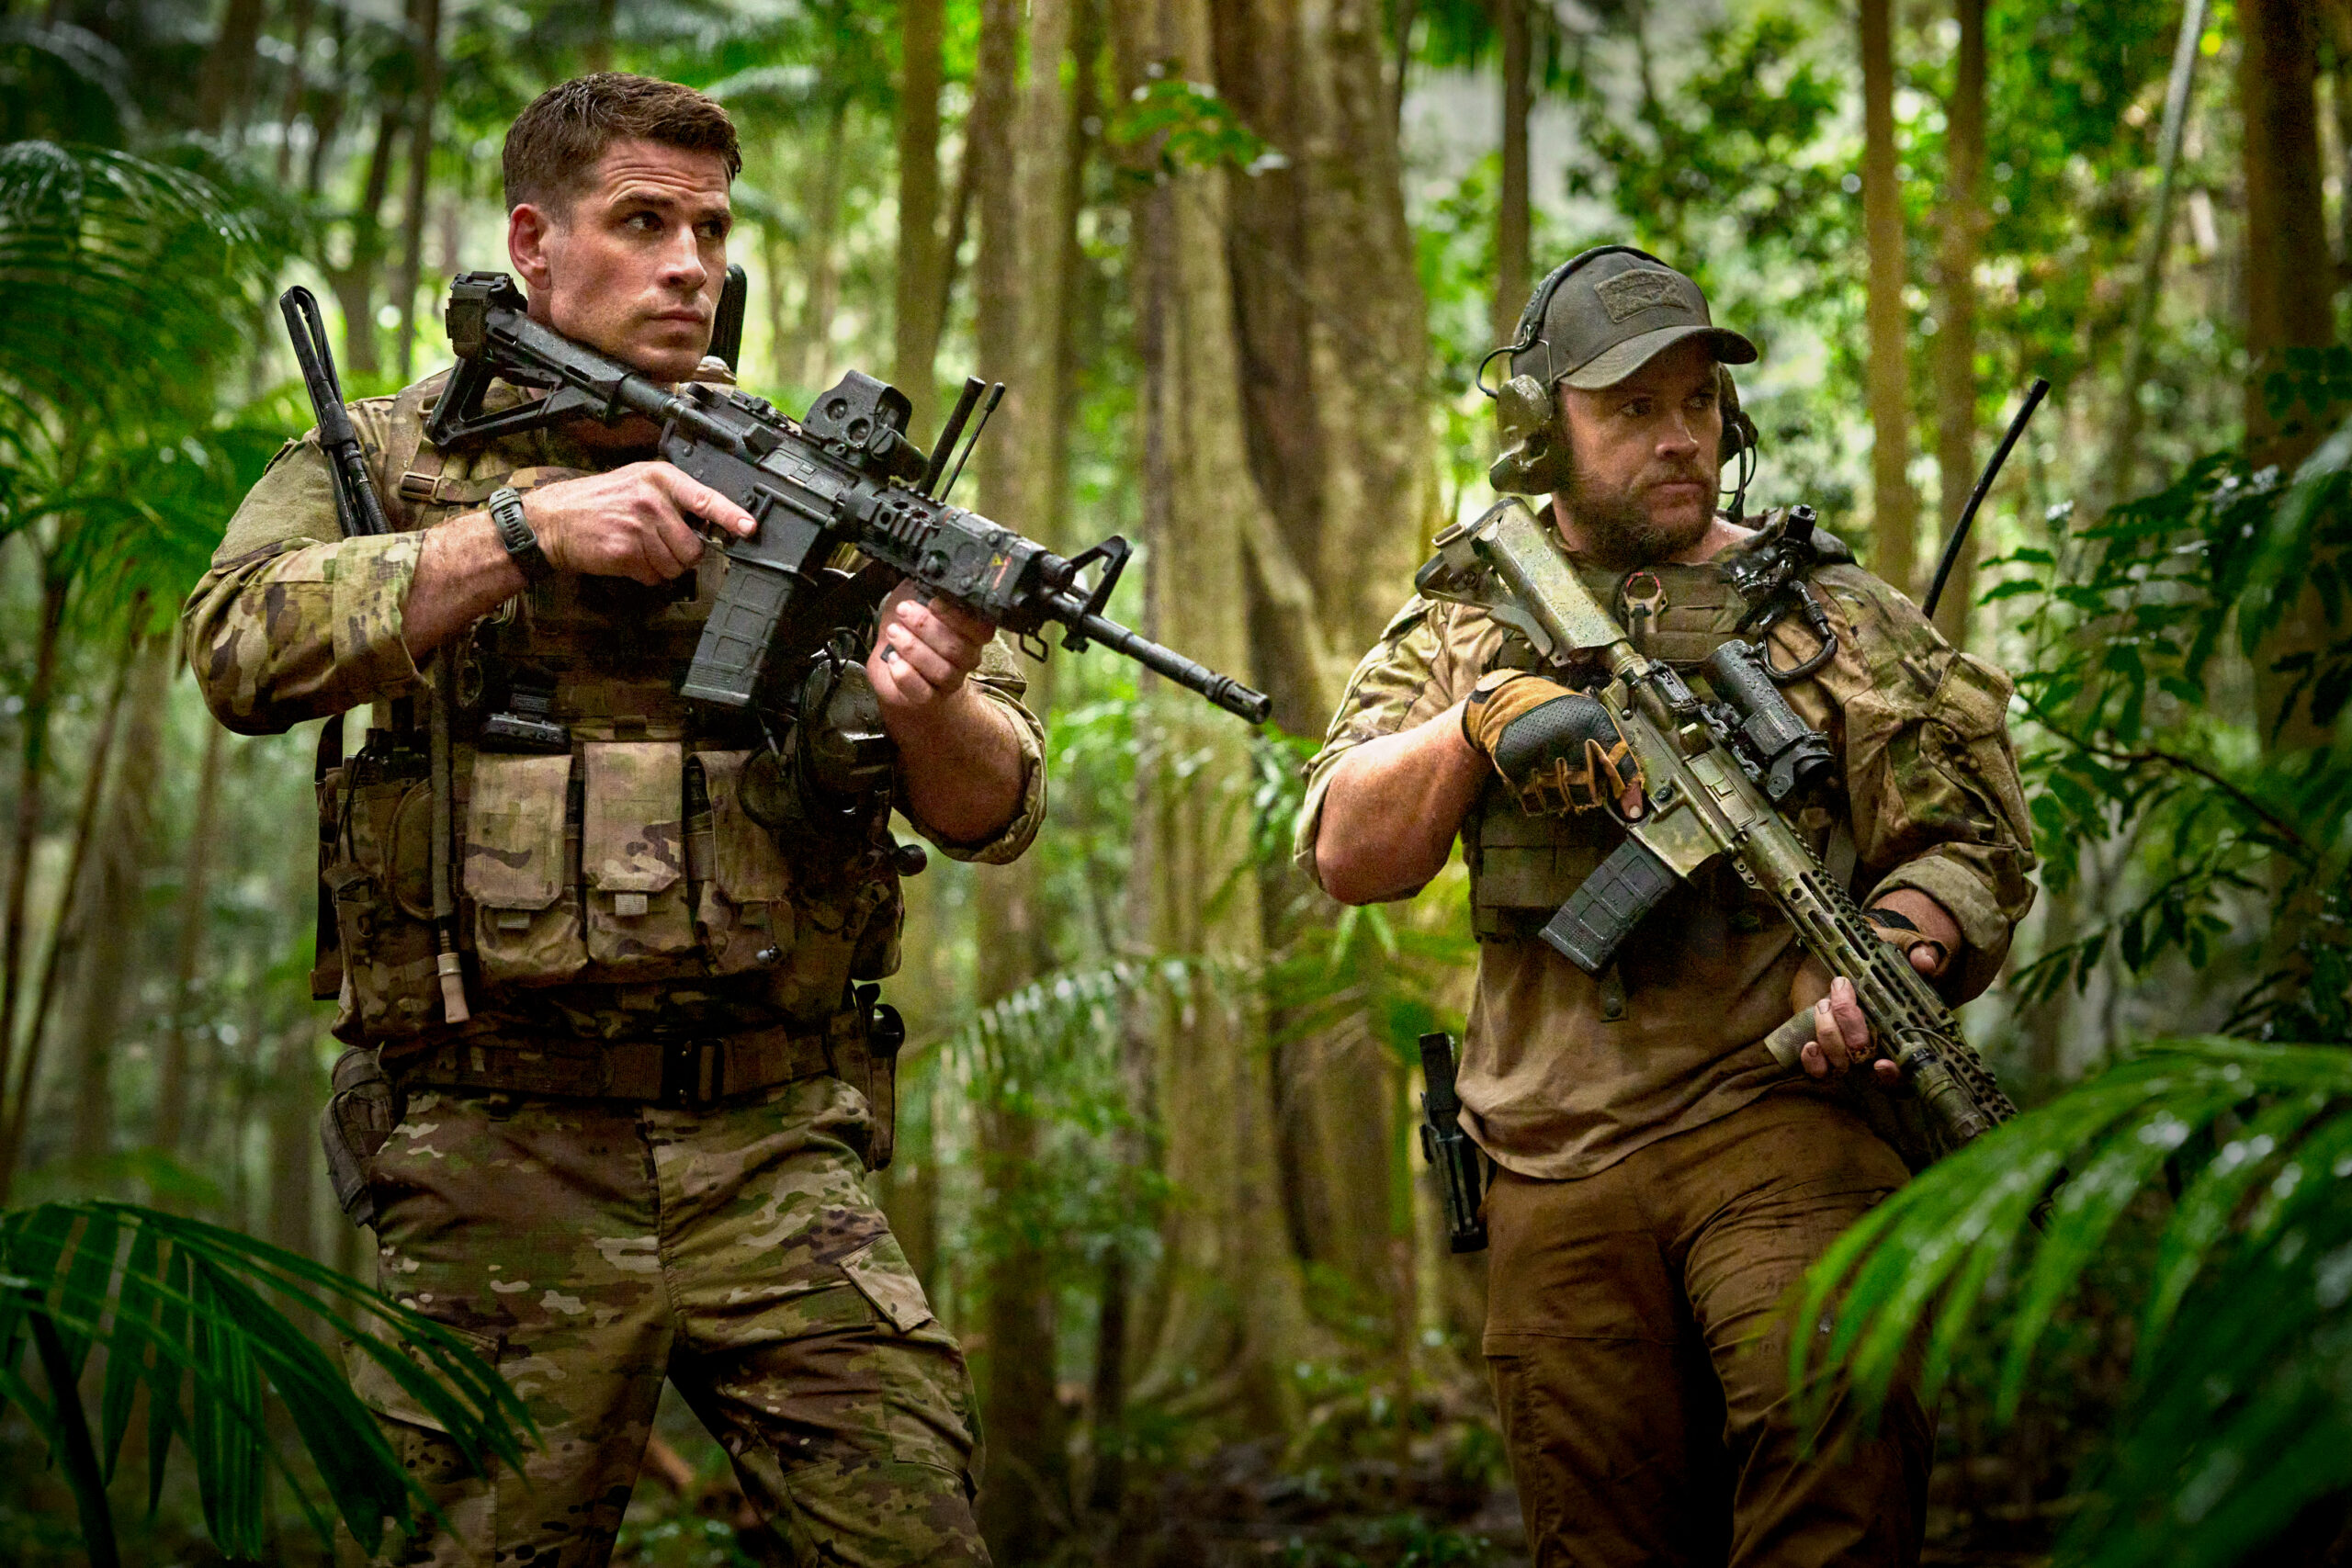 Land of the Bad Trailer Has Russell Crowe with Eyes in the Skies and Liam Hemsworth with Boots on the Ground for Military Operation